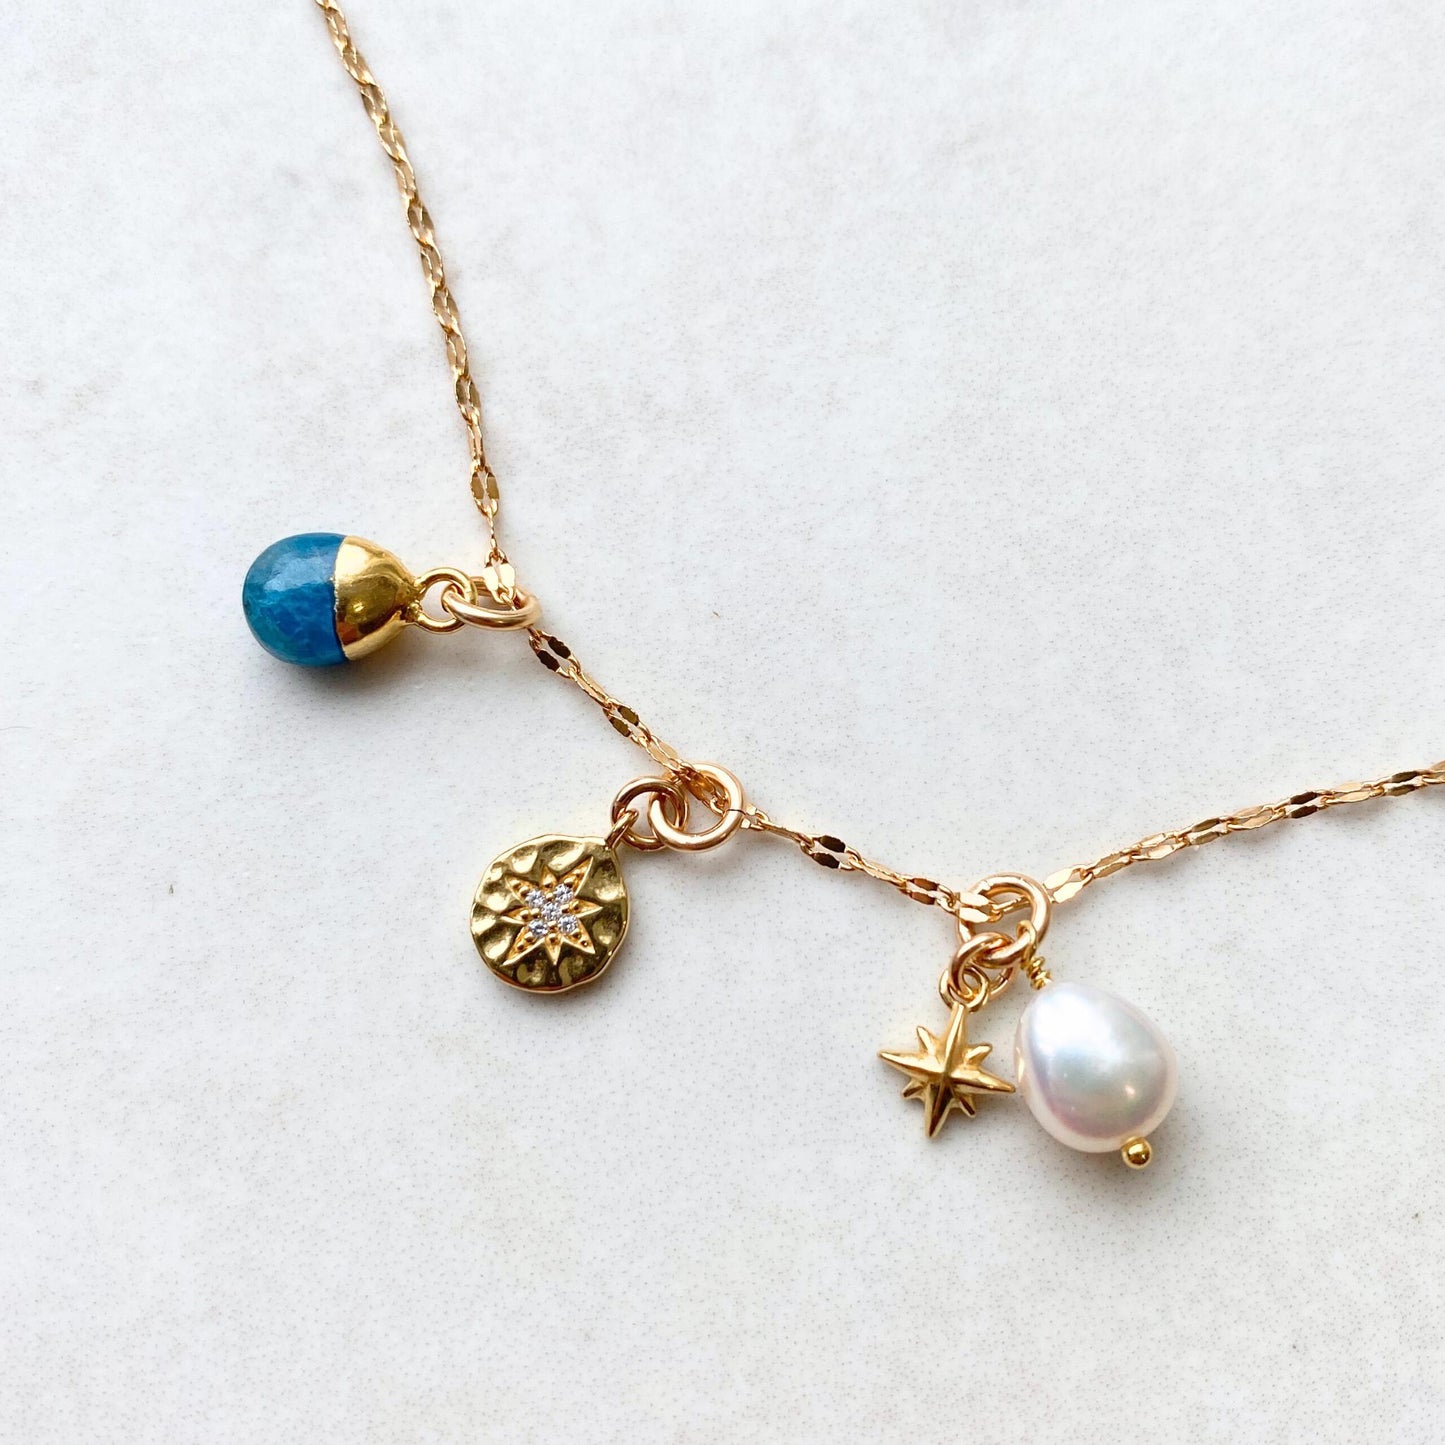 Neon Apatite Charm Necklace | Dream (Gold Plated)